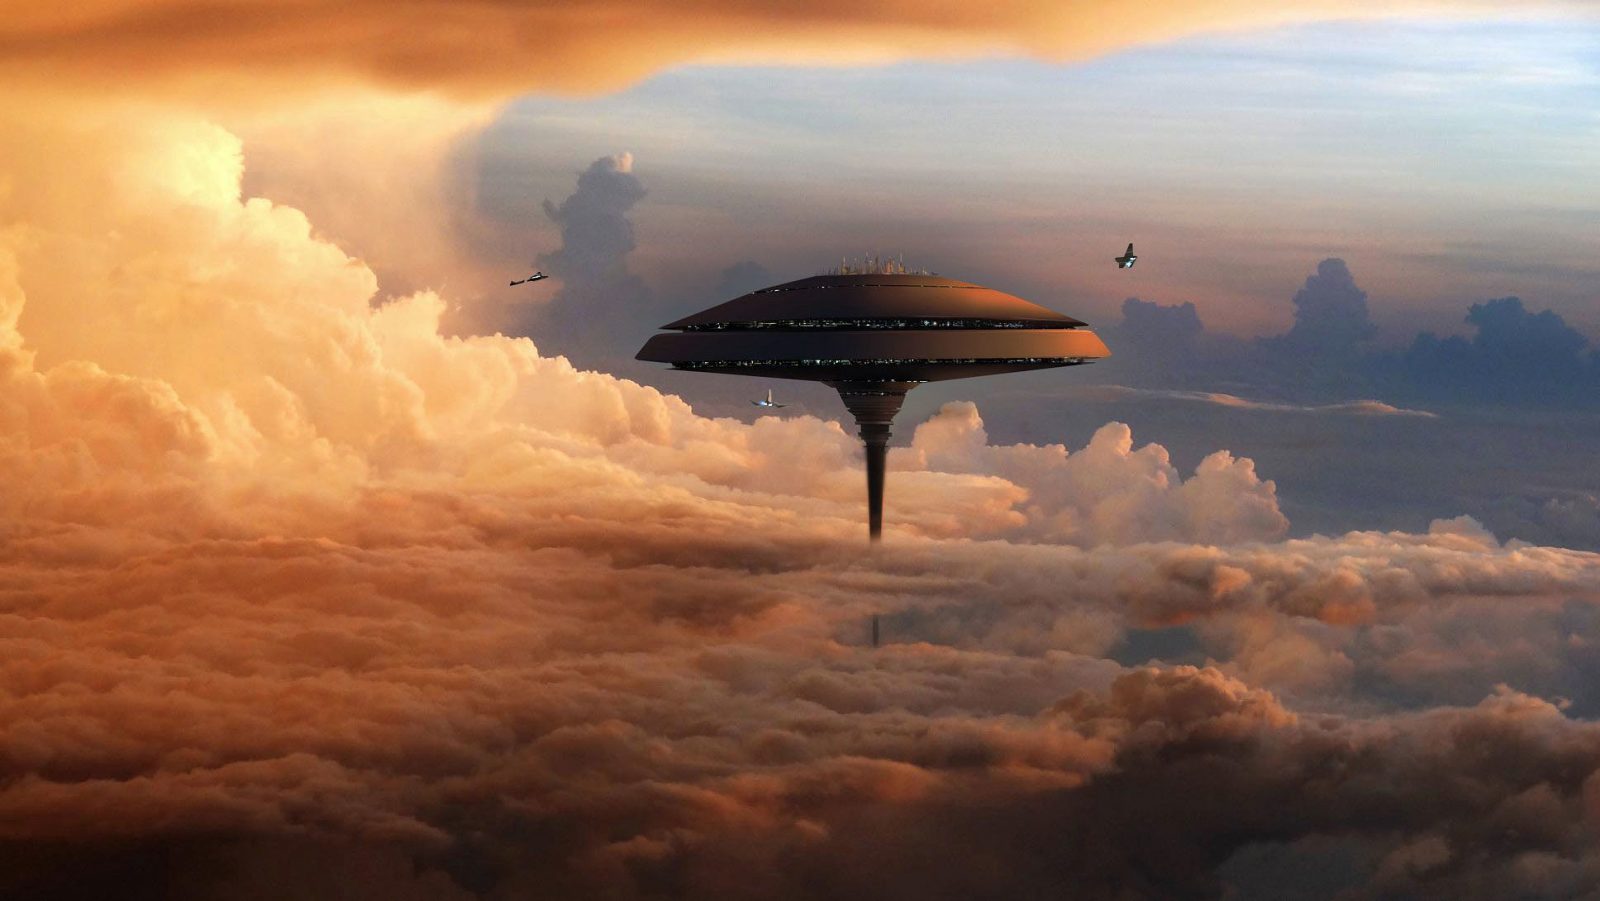 Do You Know a Little Bit About Everything: “Star Wars” Edition Cloud City